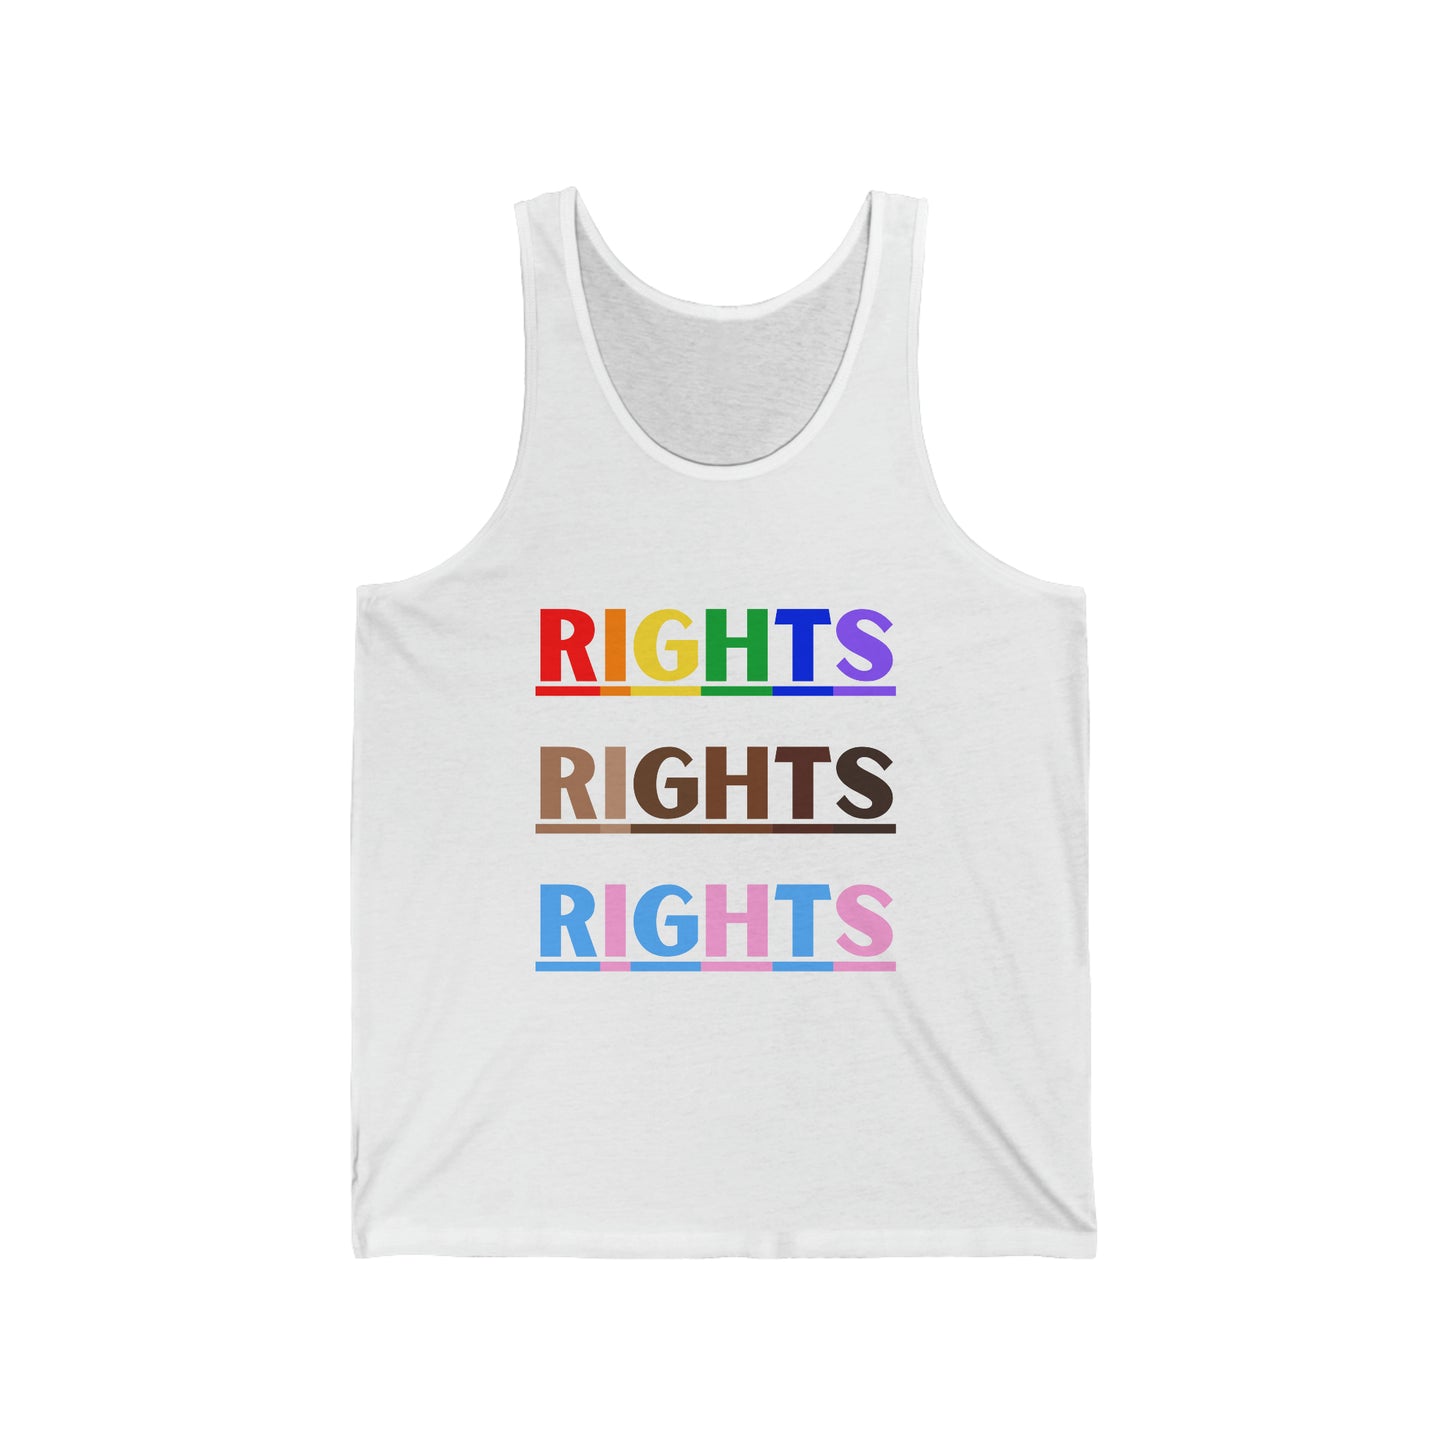 Rights, Rights, Rights Tank Tops